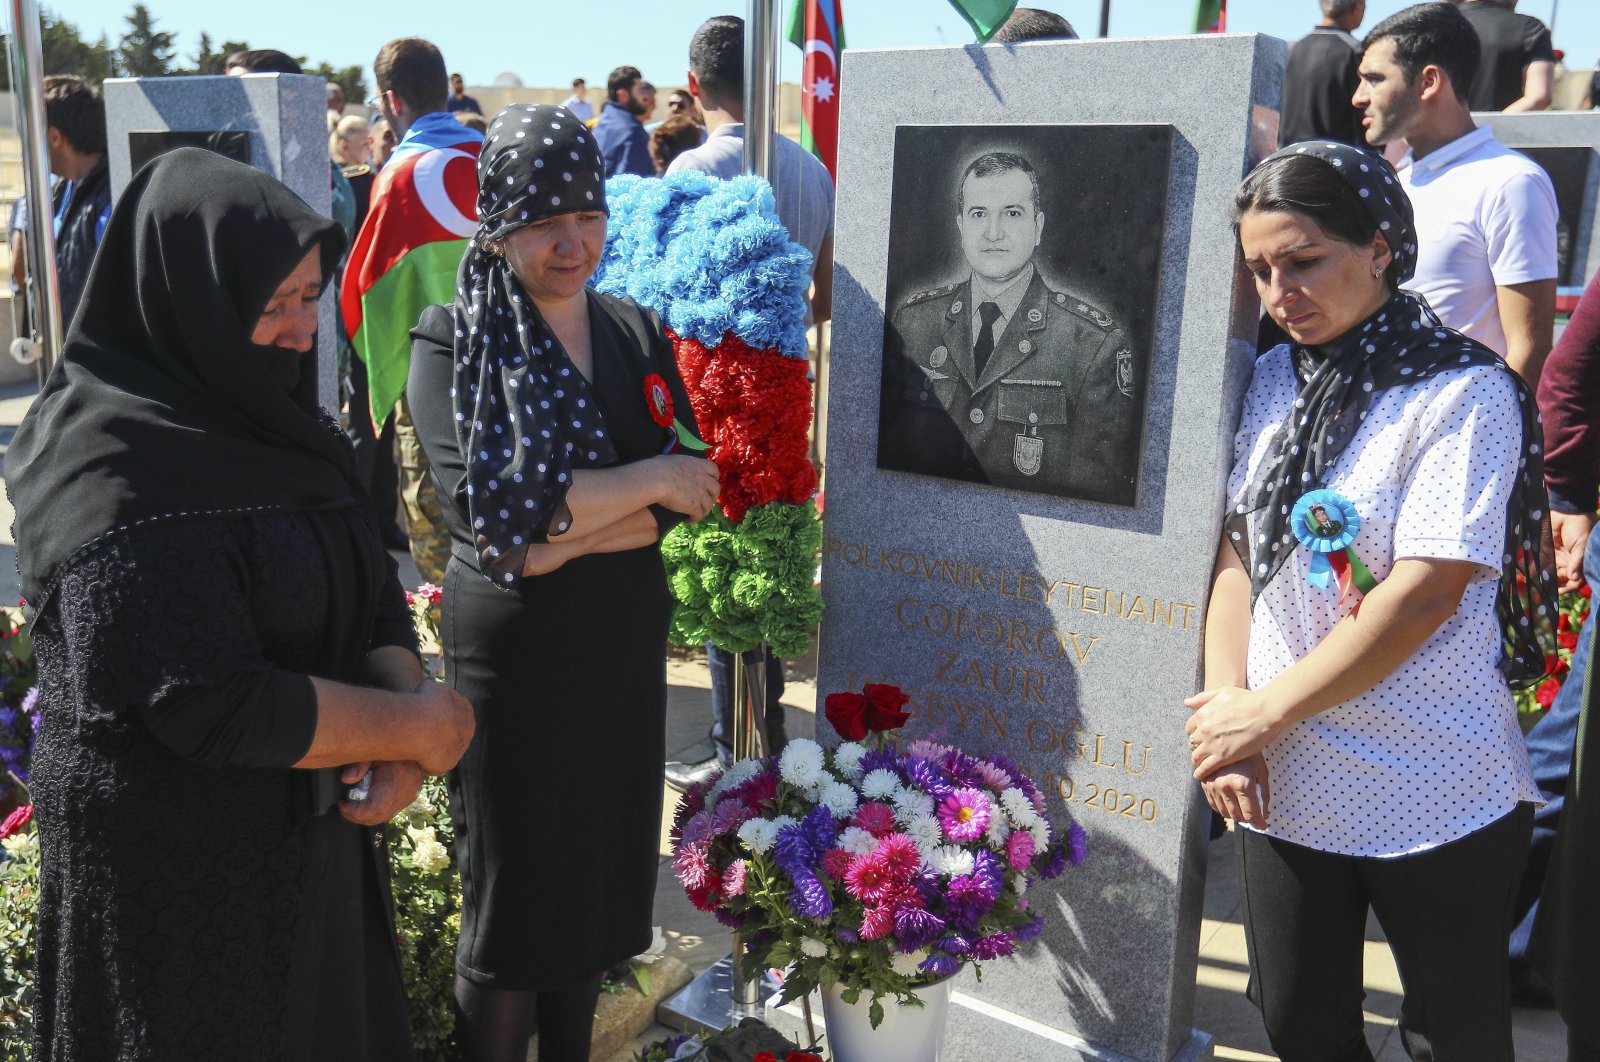 Relatives mourn near the grave of an Azerbaijani soldier at a military cemetery housing the graves of soldiers who died during the Second Karabakh War, outside Baku, Azerbaijan, Sept. 27, 2021. (AP Photo)